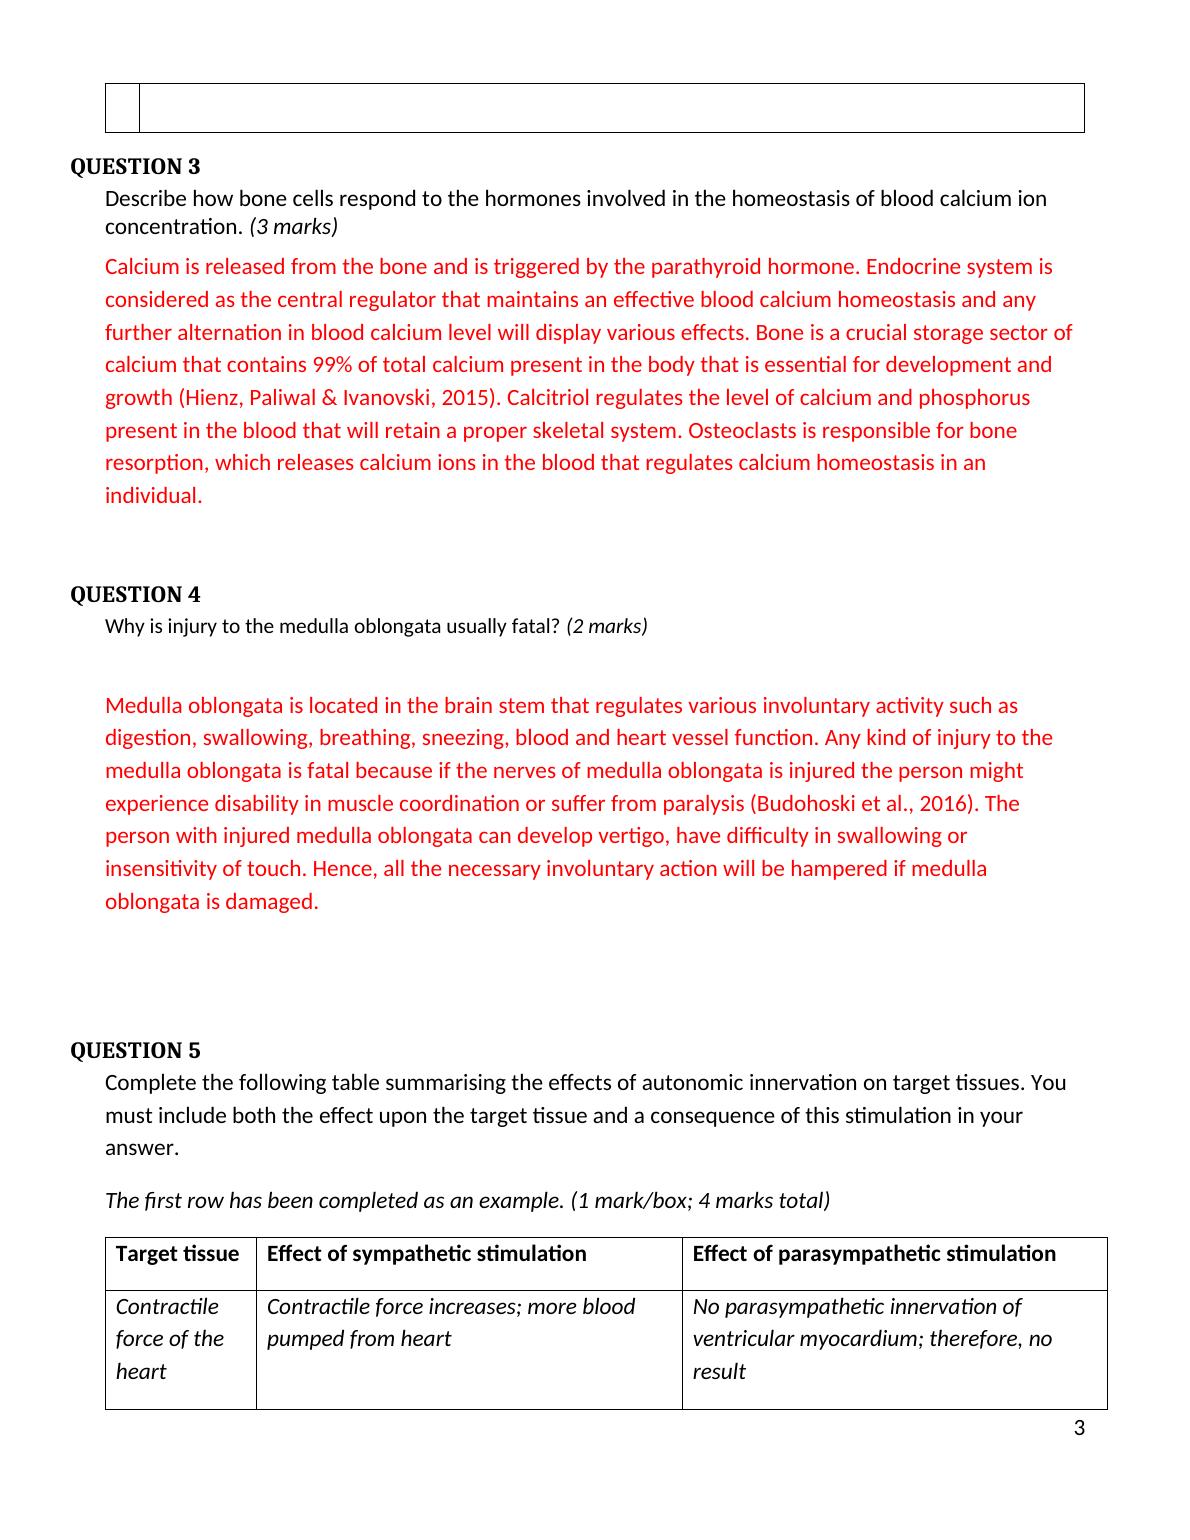 BIOL121 Worksheet: Immunity, Bone Cells, Muscle Contraction, Urine Formation_3